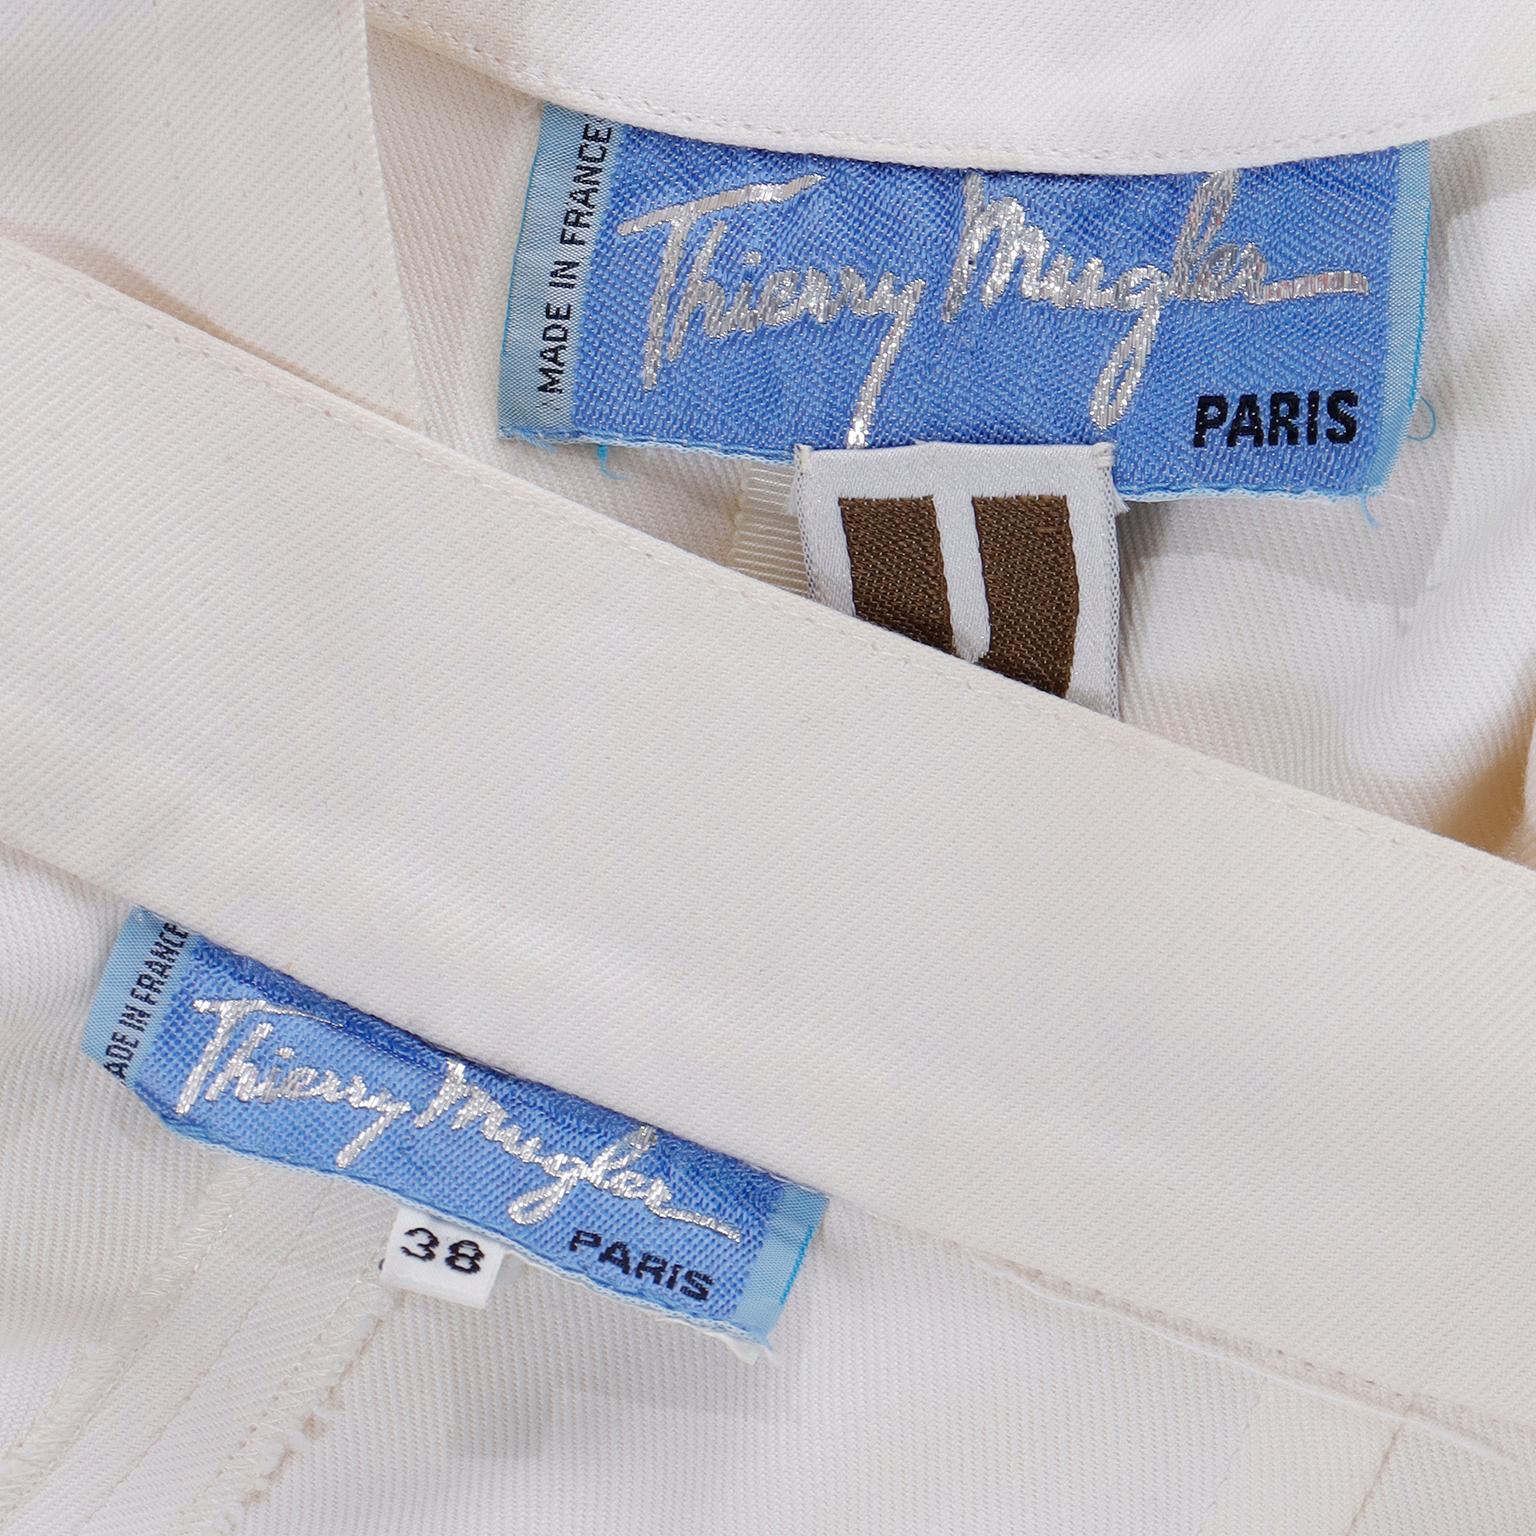 Thierry Mugler Vintage White 2 Pc Suit Jacket & Trousers Outfit  For Sale 8